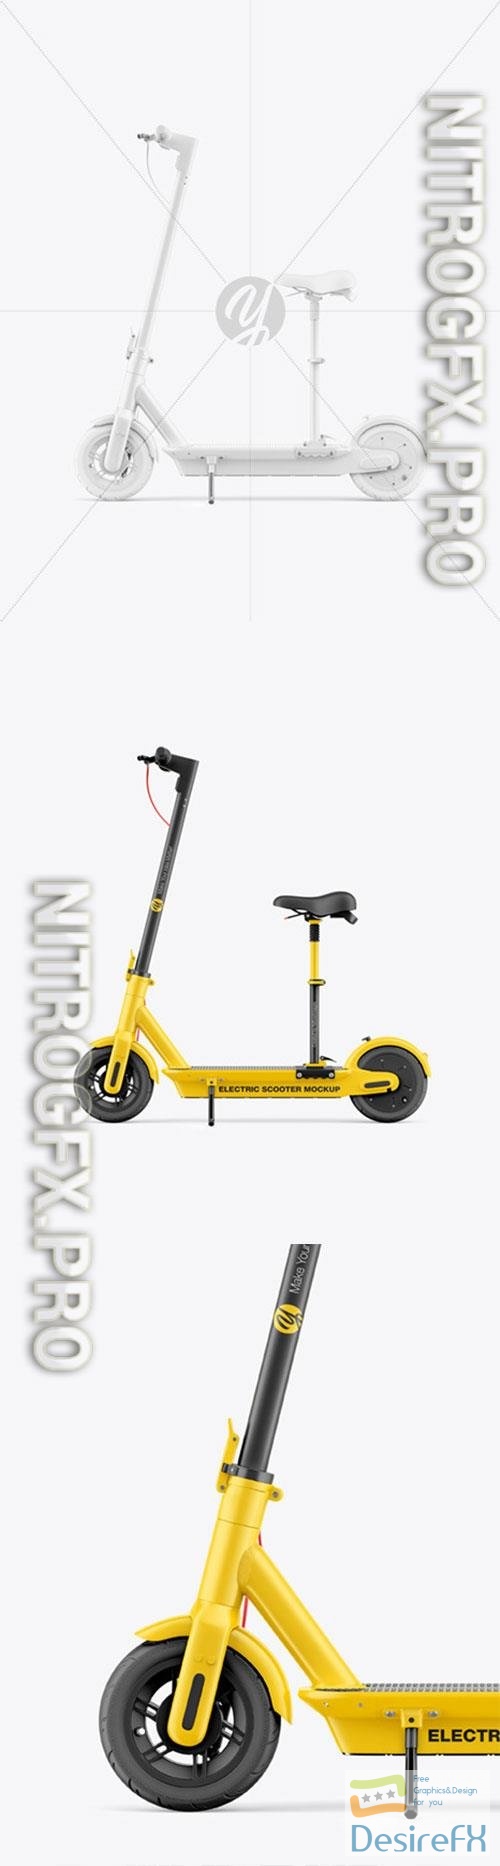 Electric Scooter Mockup with Seat - Side View 86461